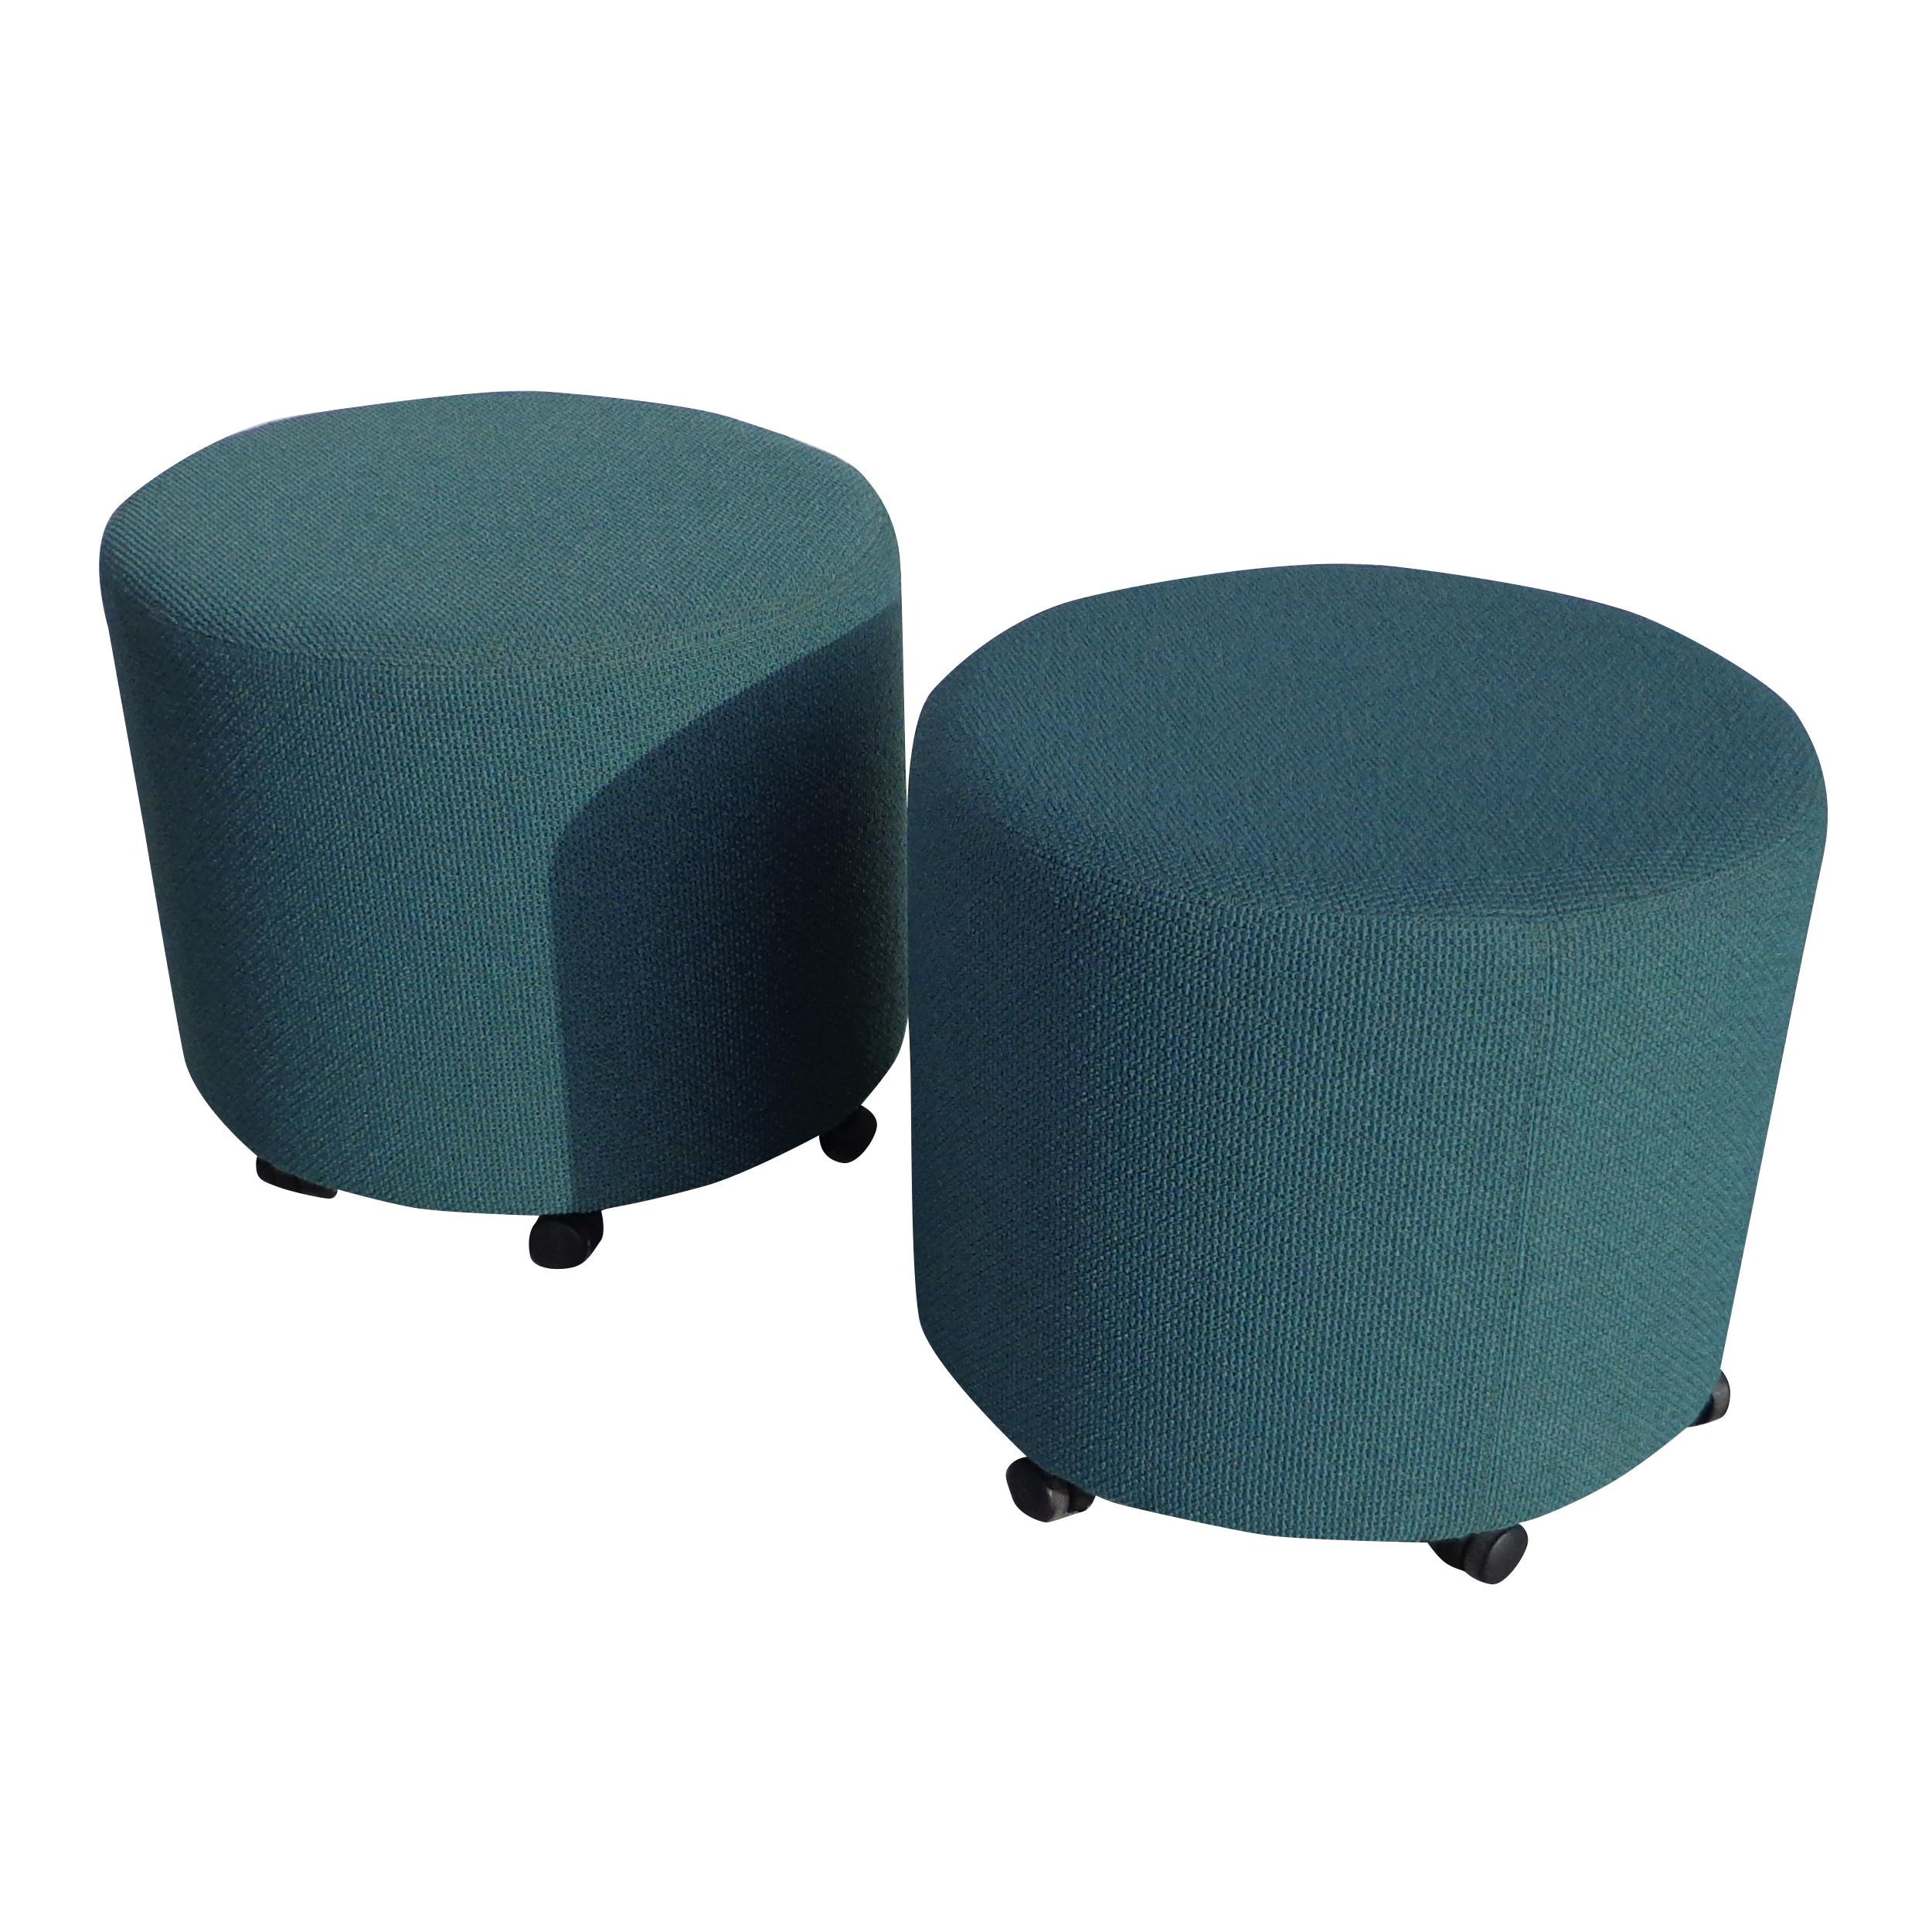 Pair Teknion collaborative ottomans

The collaborative ottoman provides casual seating for guests in a workstation or lounge environment. In a lounge, the ottoman can
be used in their own grouping or intermingled with other lounge seating,